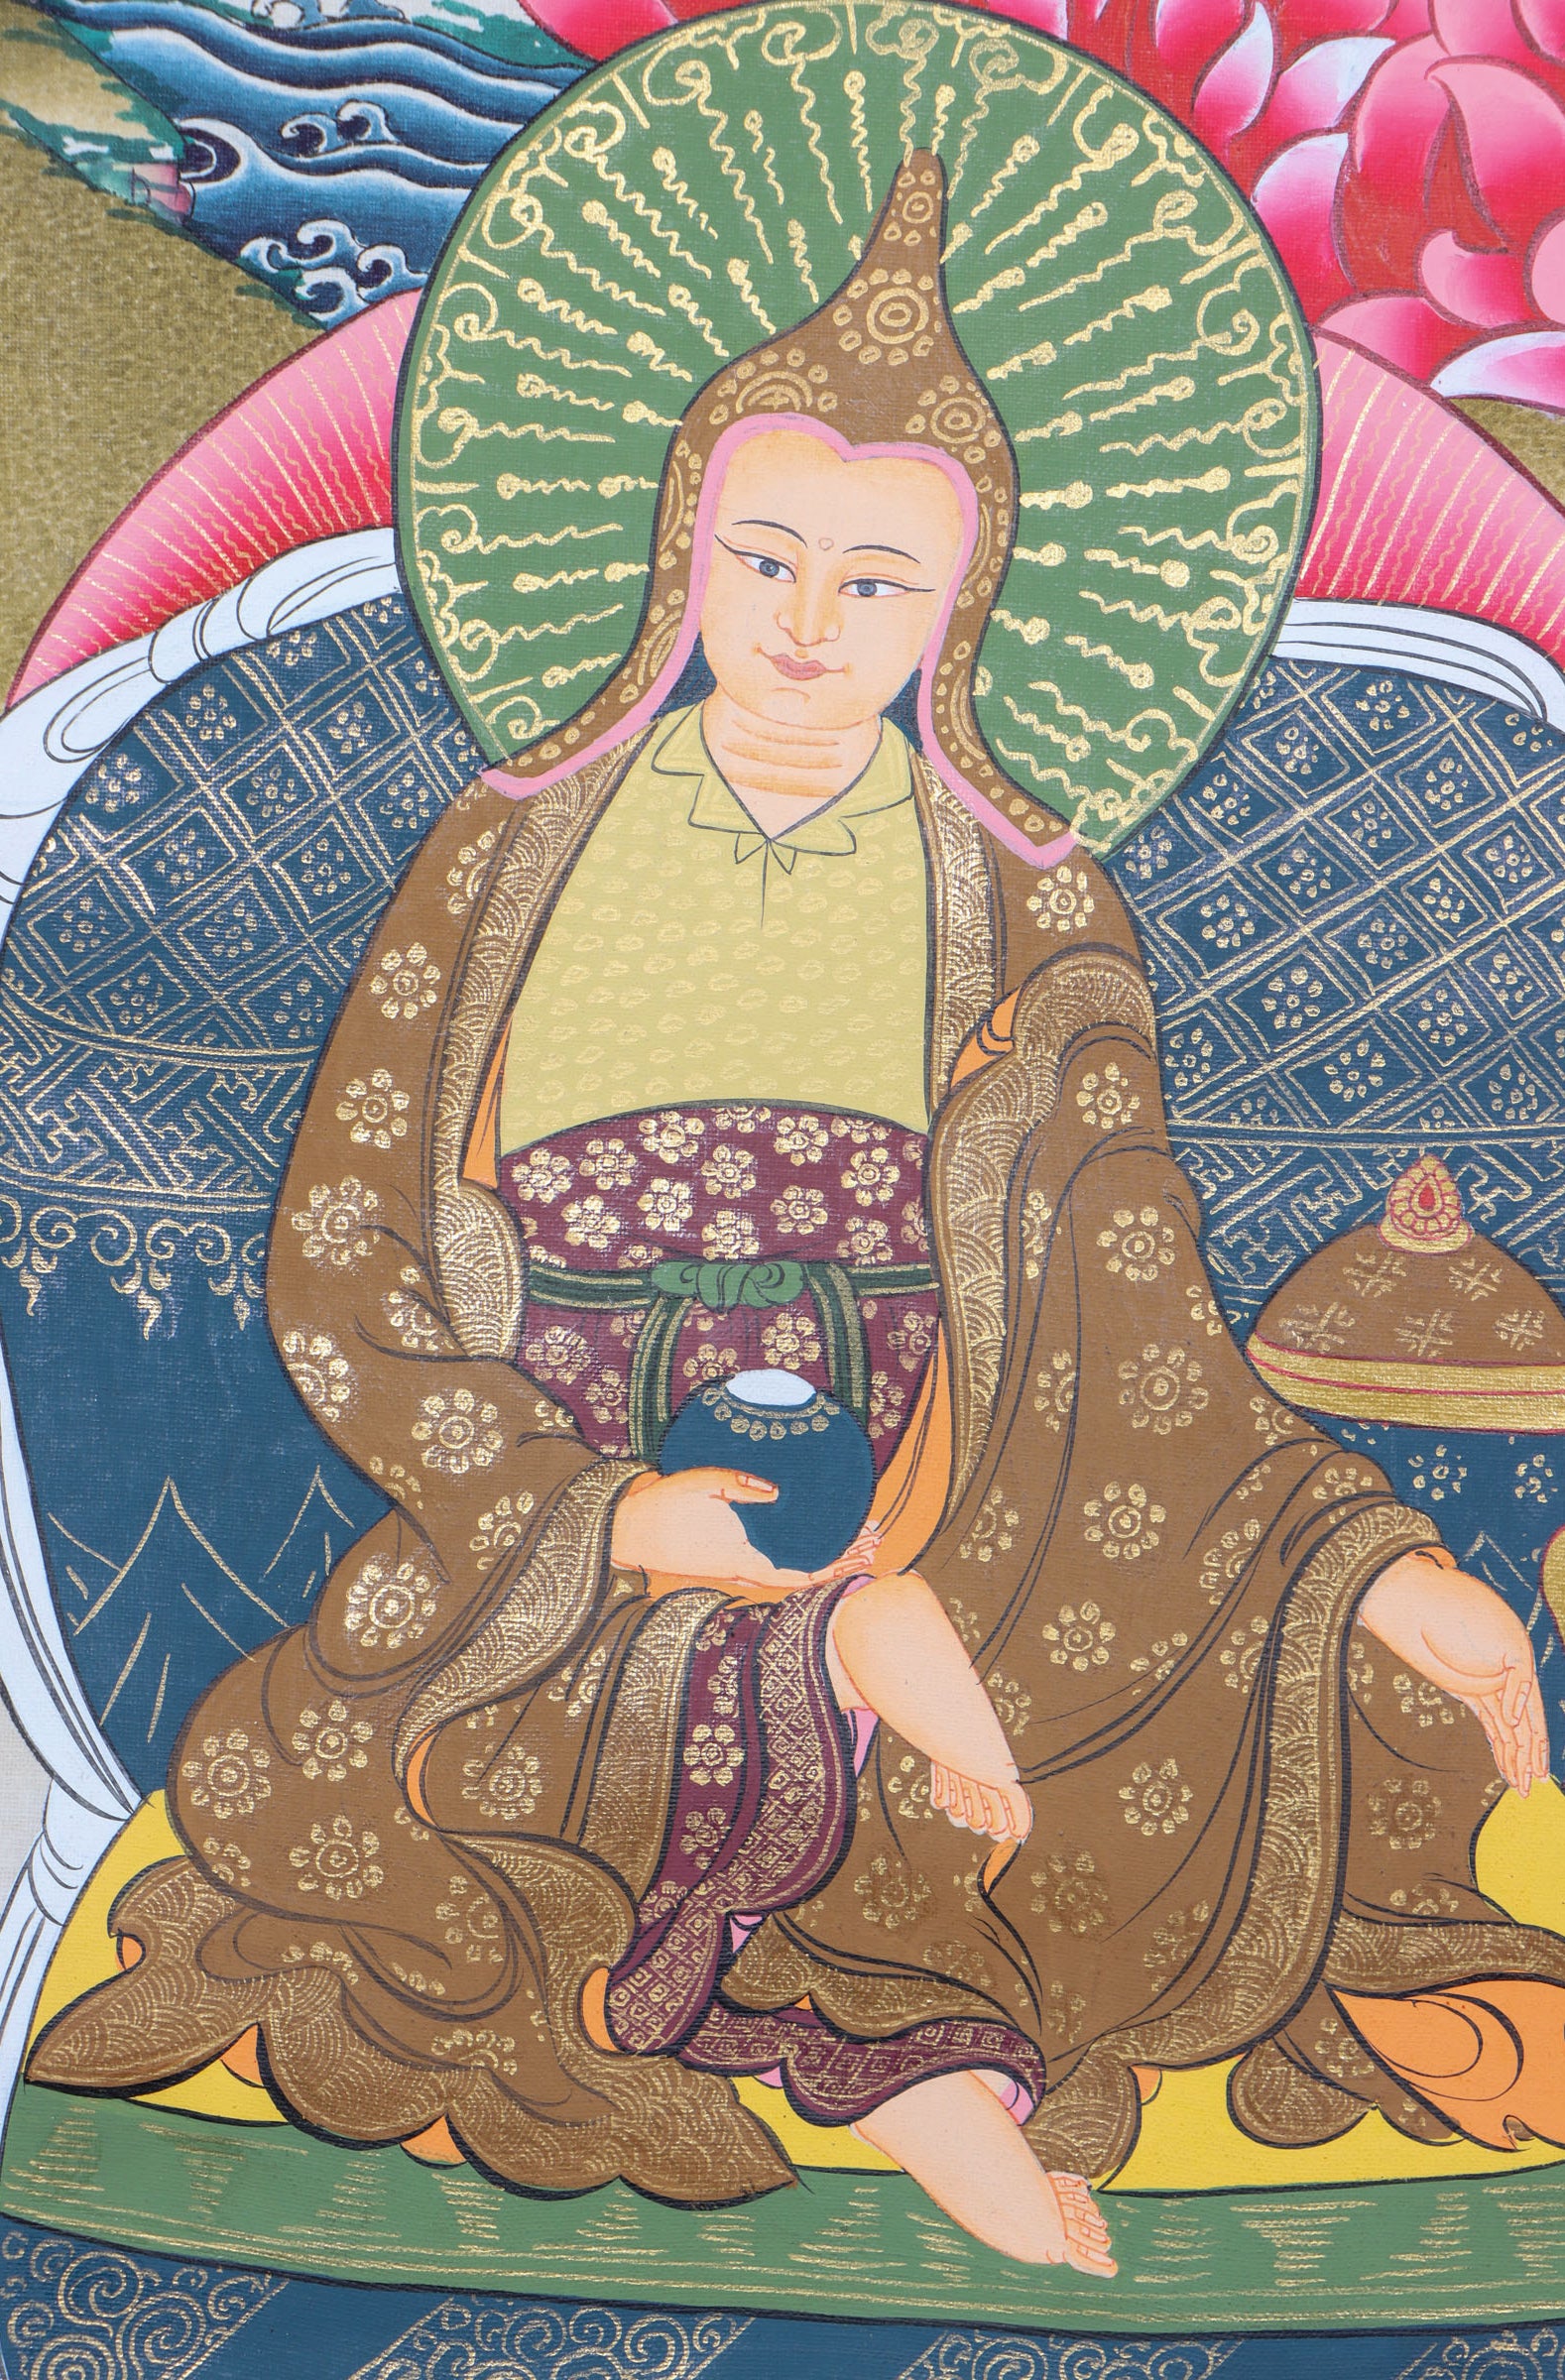 Guru Thangka Painting for spiritual guidance, protection, and the removal of obstacles.